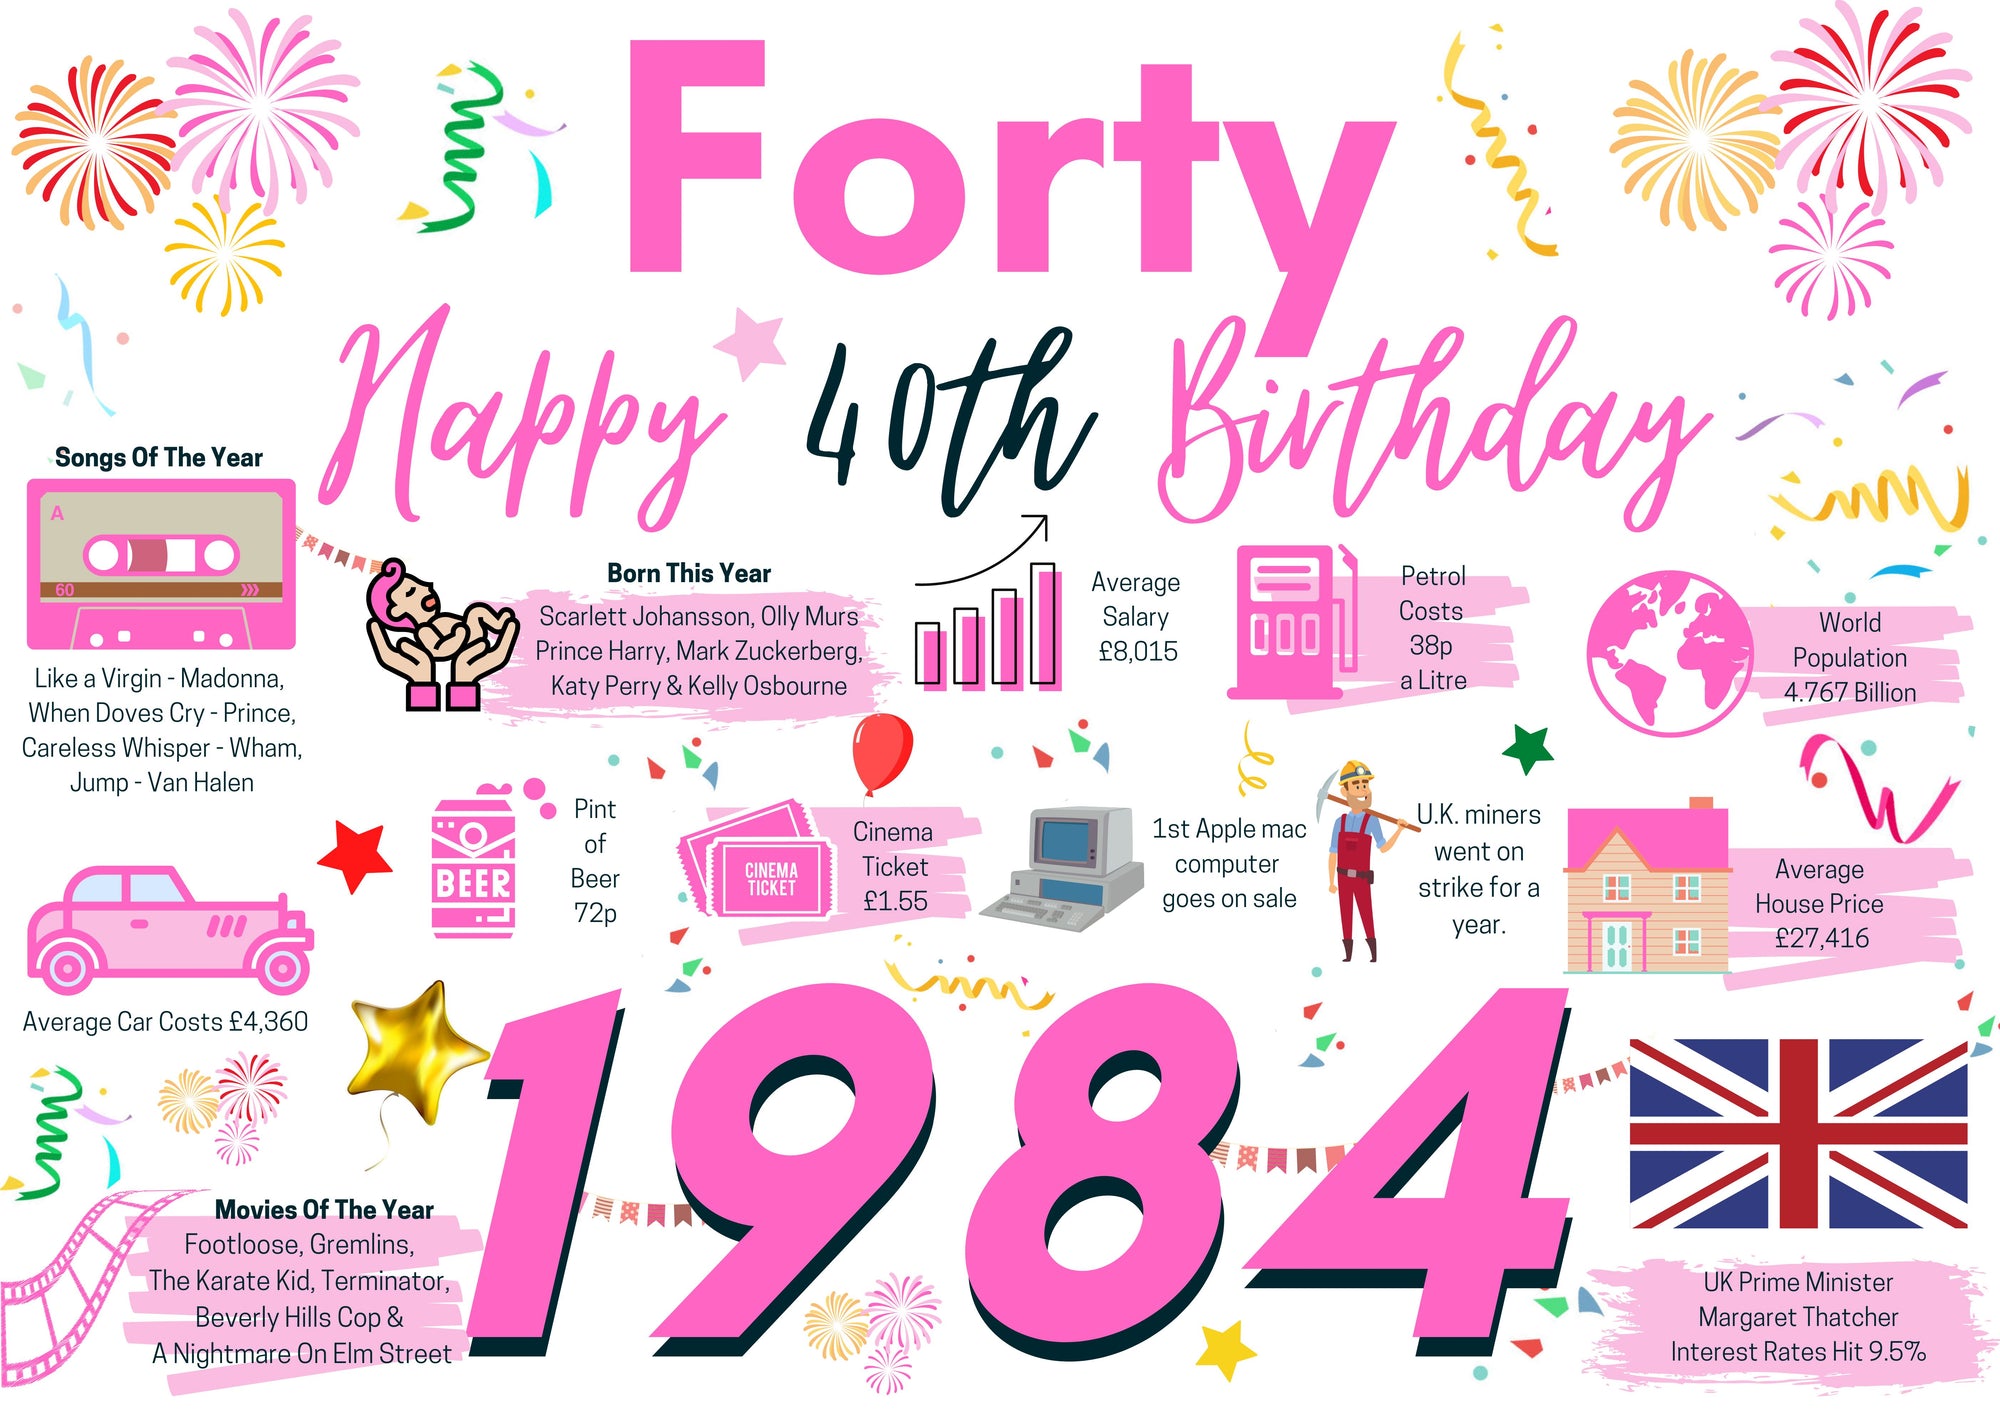 40th Birthday Card For Her Forty, Born In 1984 Facts Milestone